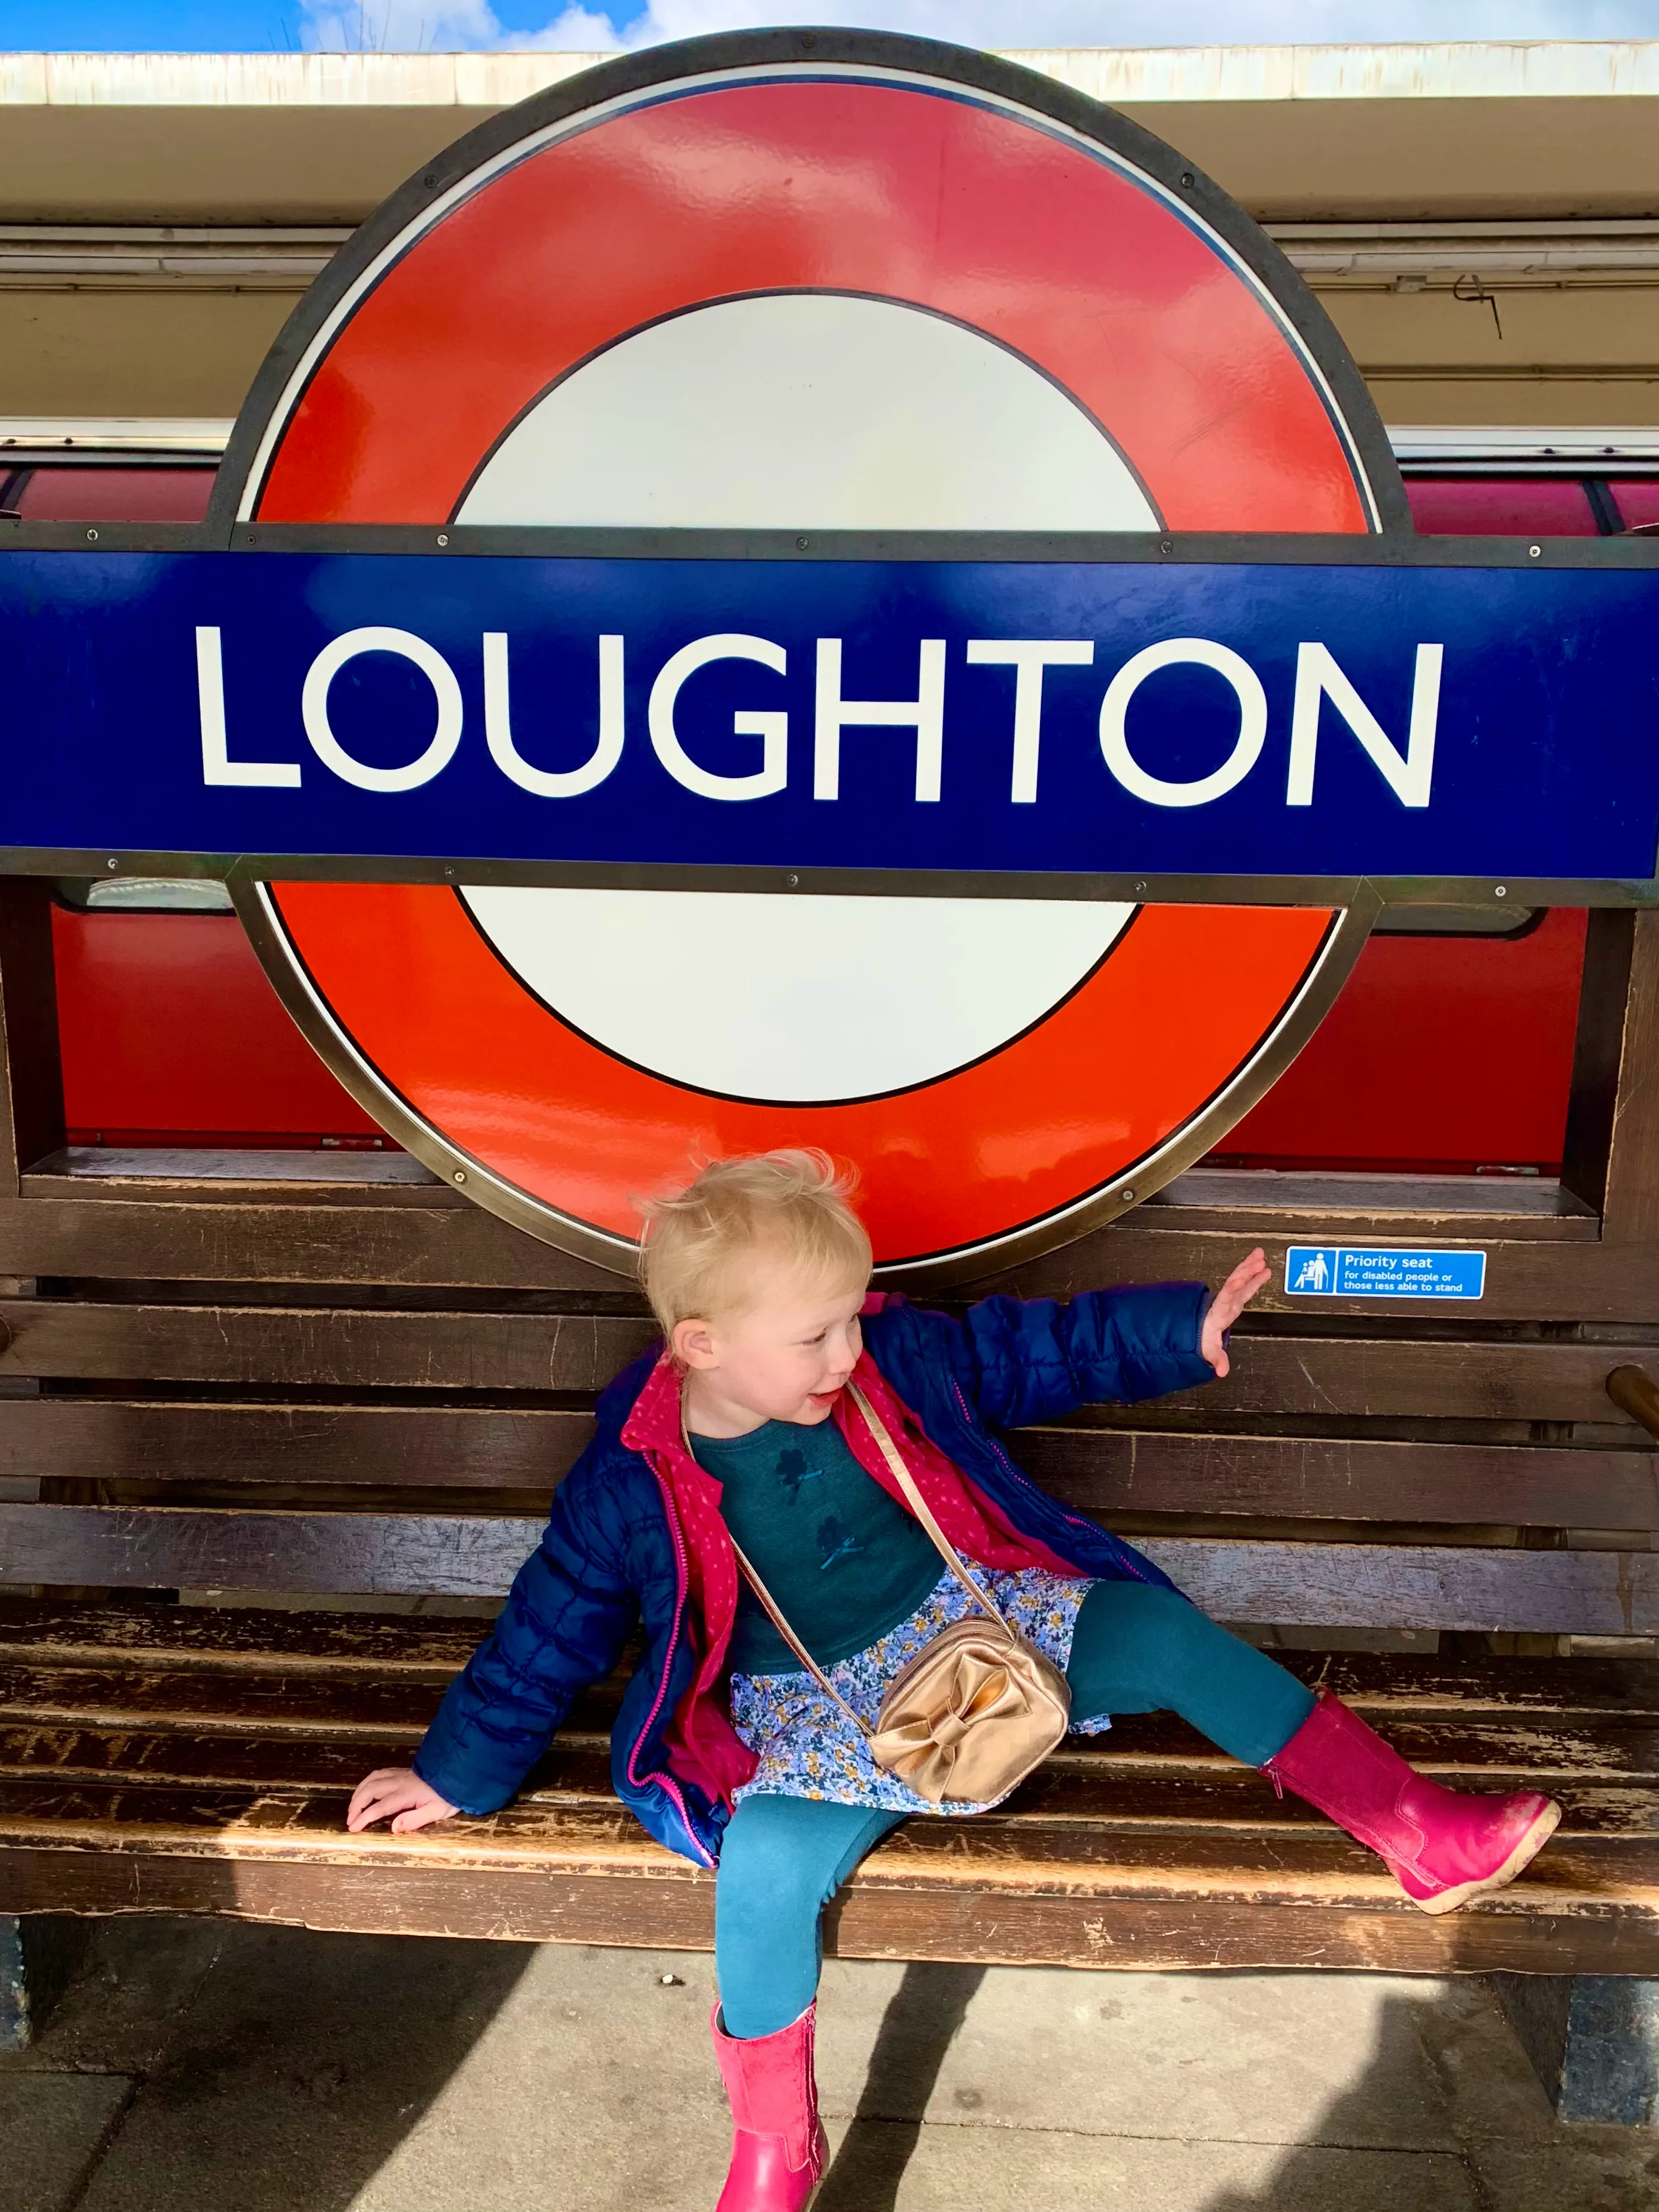 A child sitting on a bench next to Loughton underground station sign